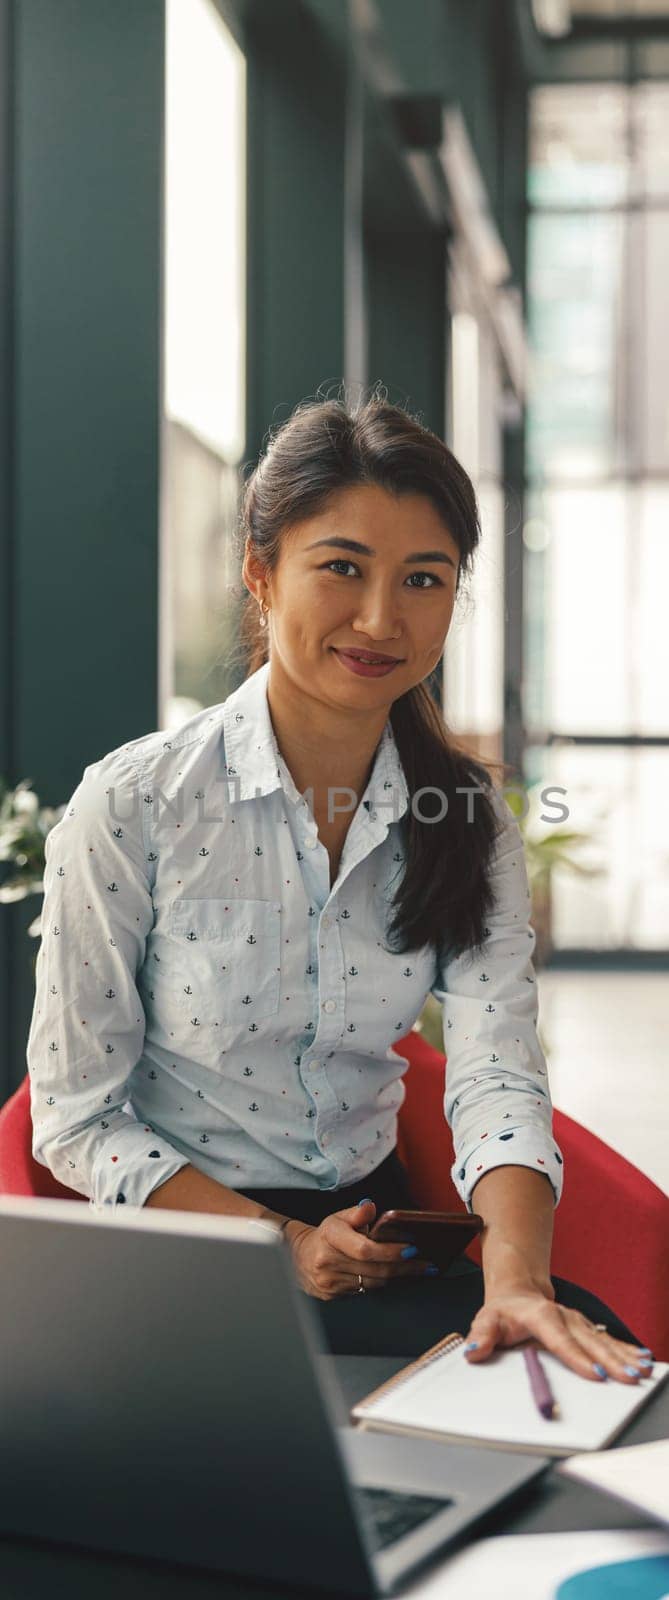 Smiling business woman holding phone and looking at camera while working on laptop in office